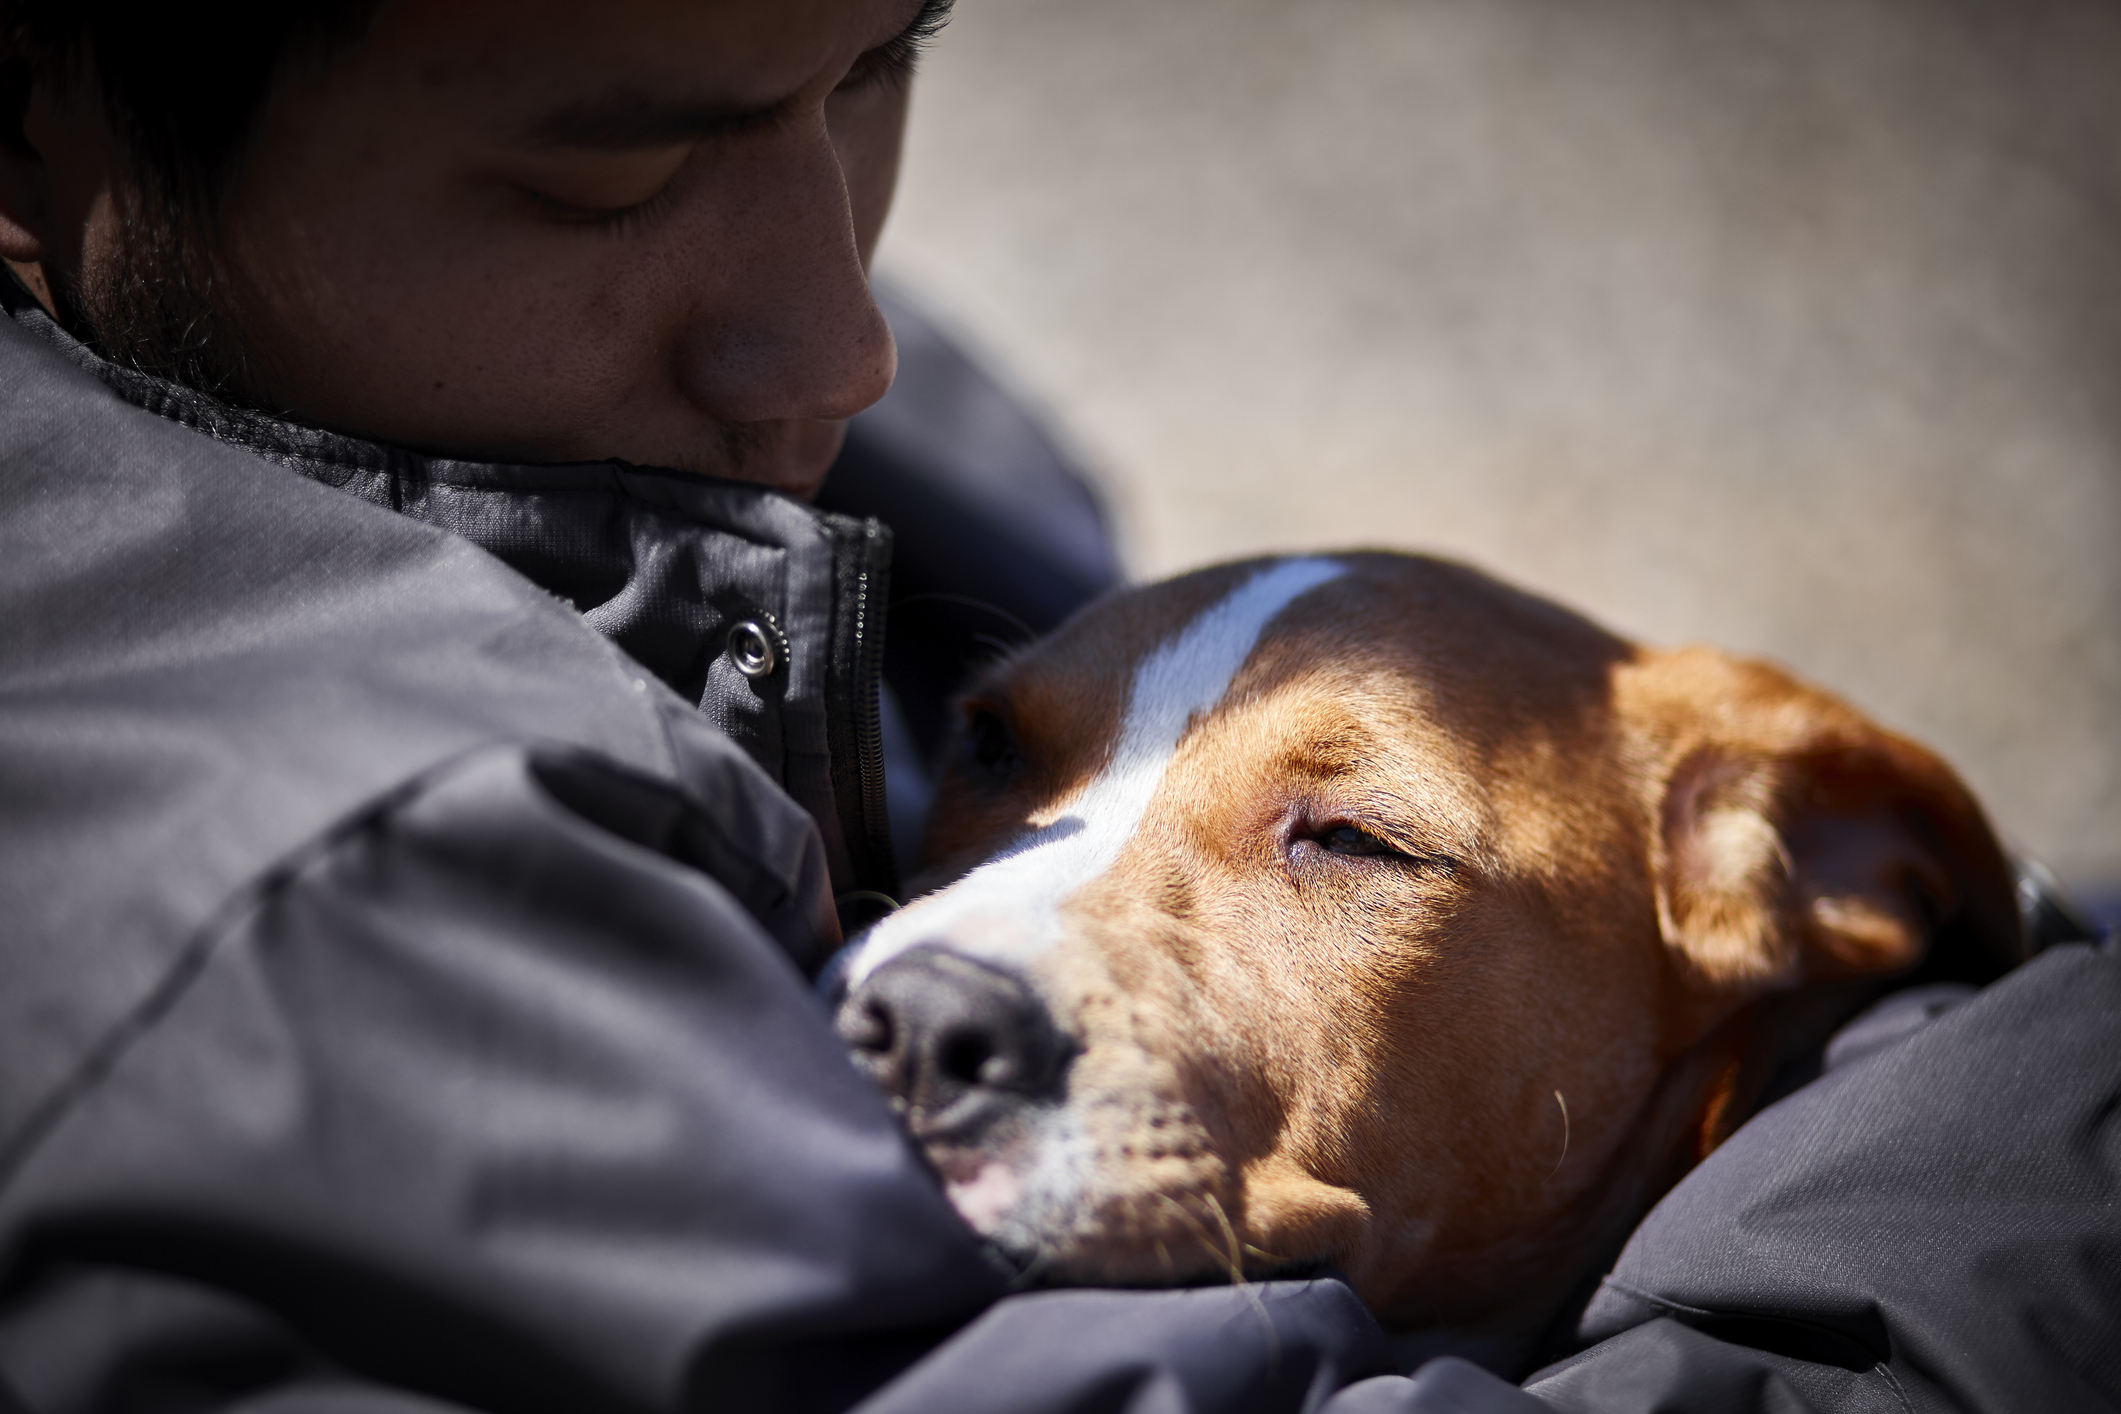 Closeup of a young man with pale skin and freckles clinging to a PTSD service dog with tan fur and a white stripe down its nose. The dog burrows itself into the man's jacket to offer him comfort and grounding